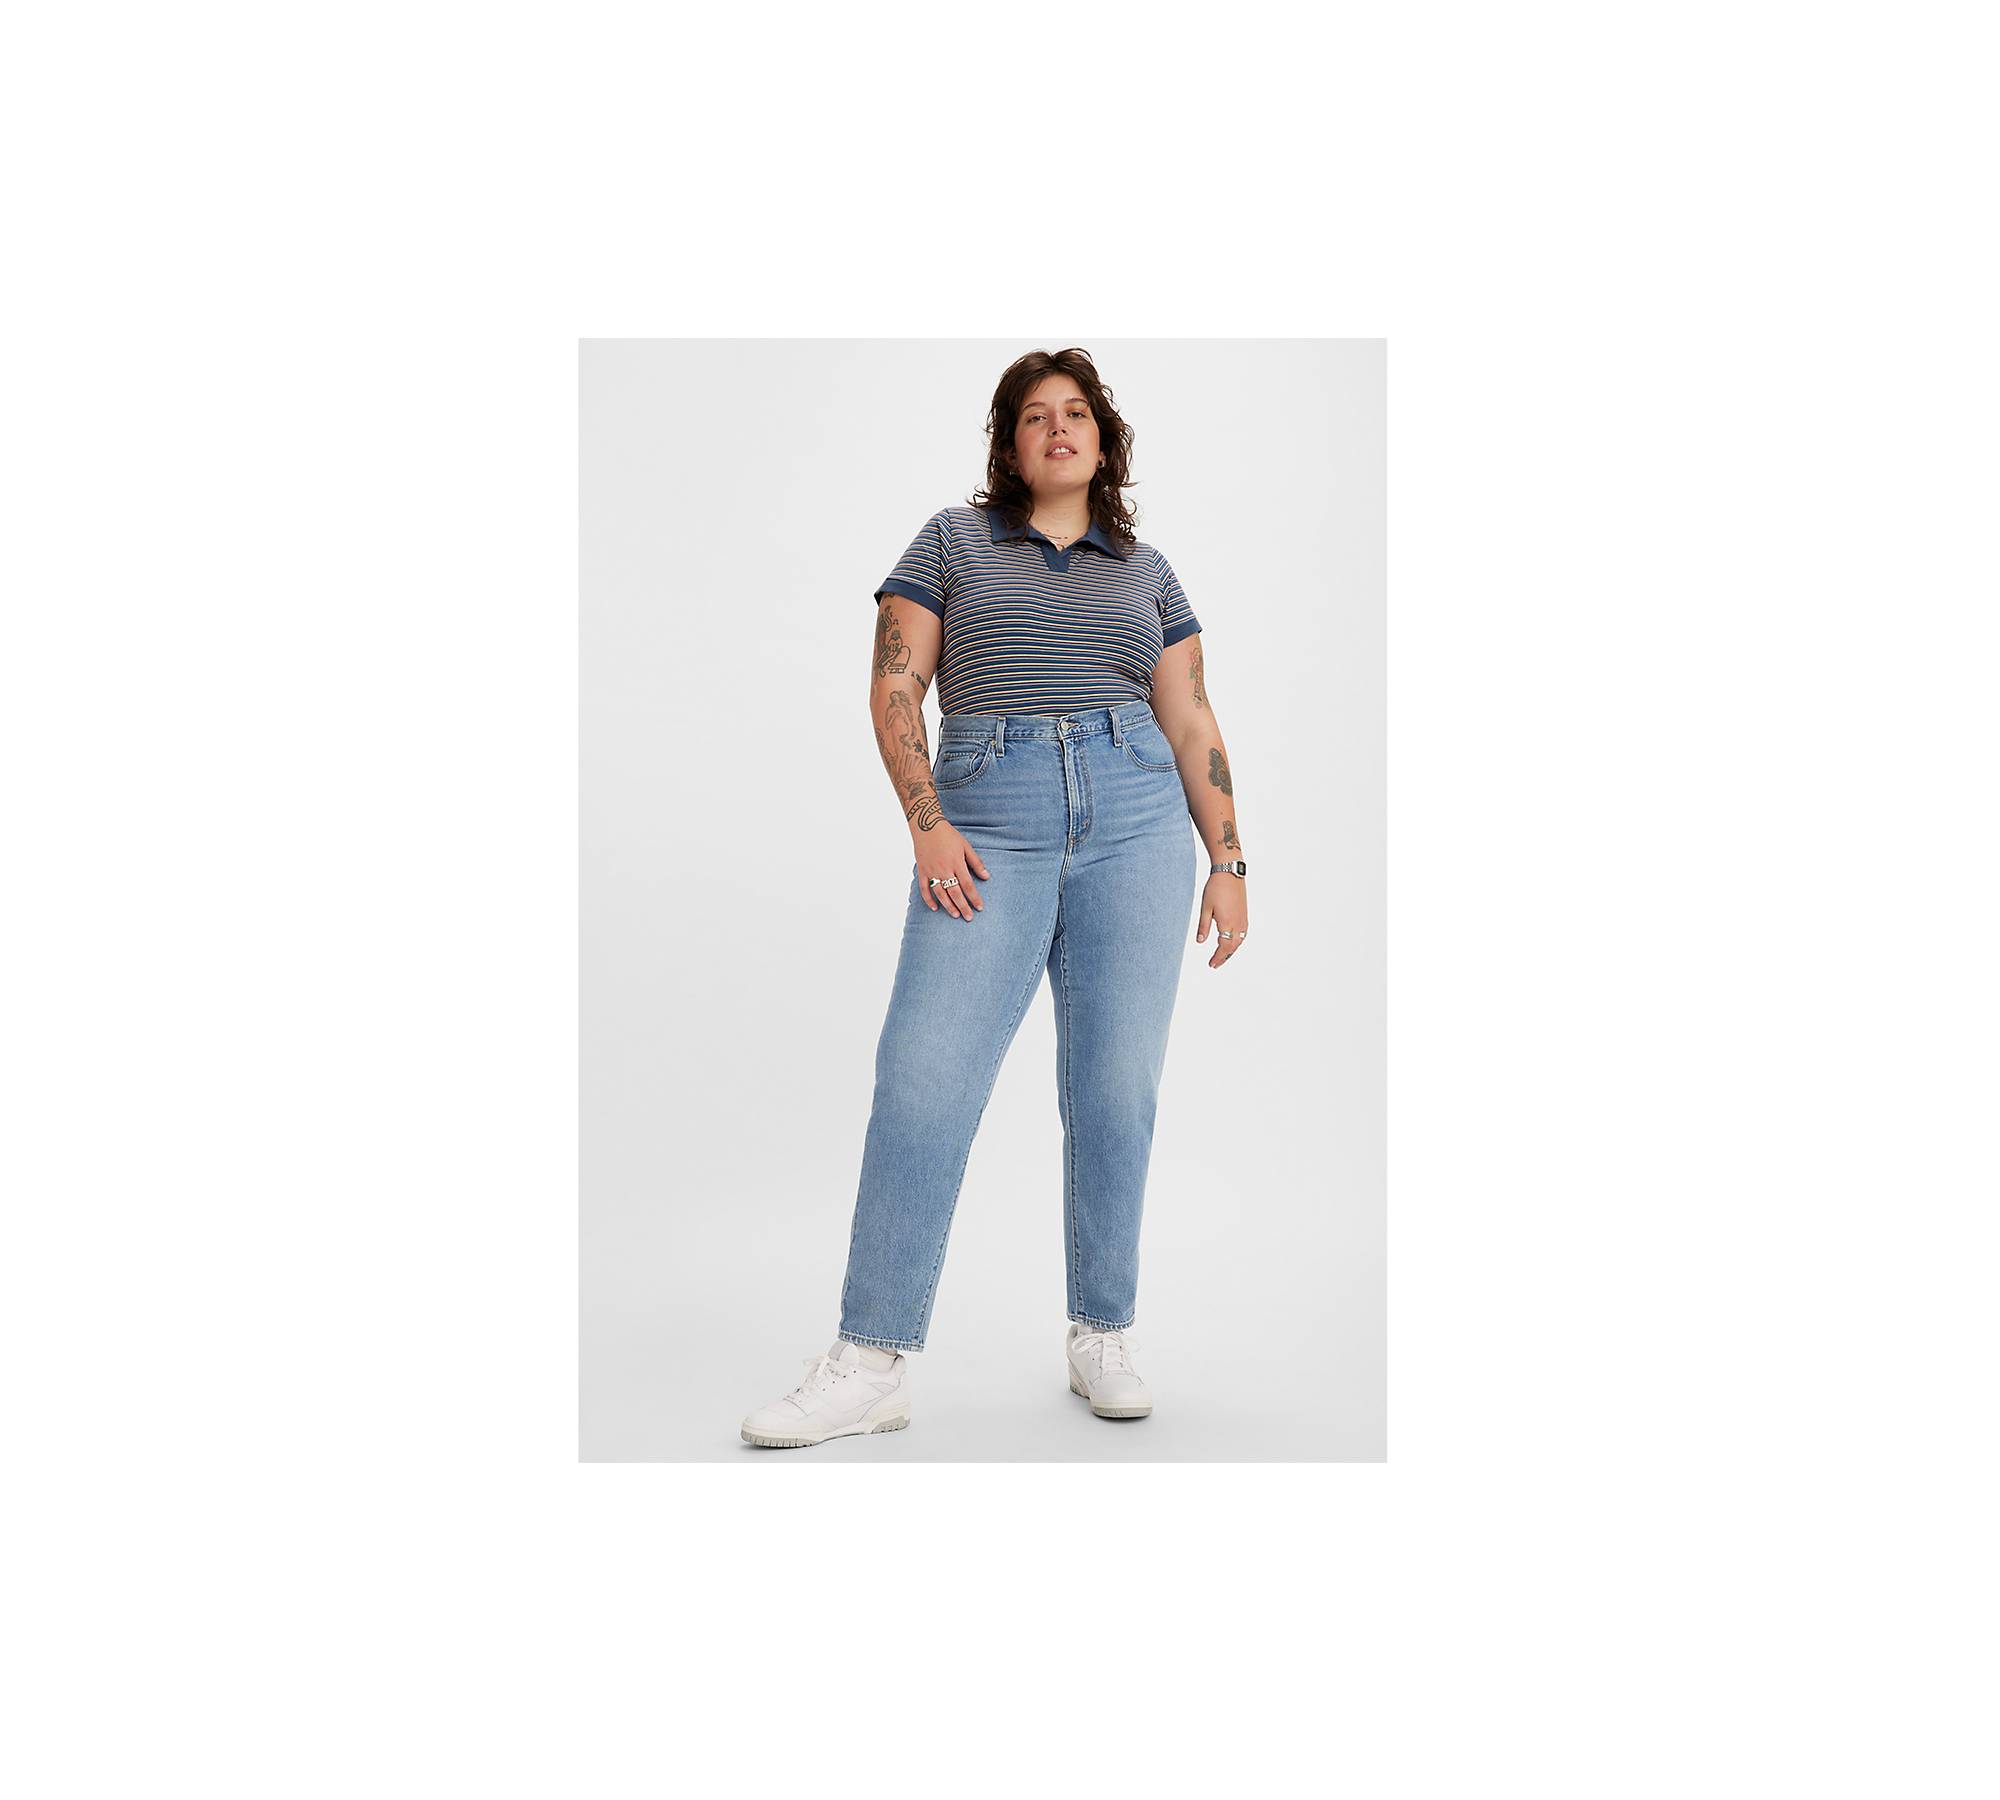 Dyster snigmord Andre steder 80s Mom Women's Jeans (plus Size) - Medium Wash | Levi's® US